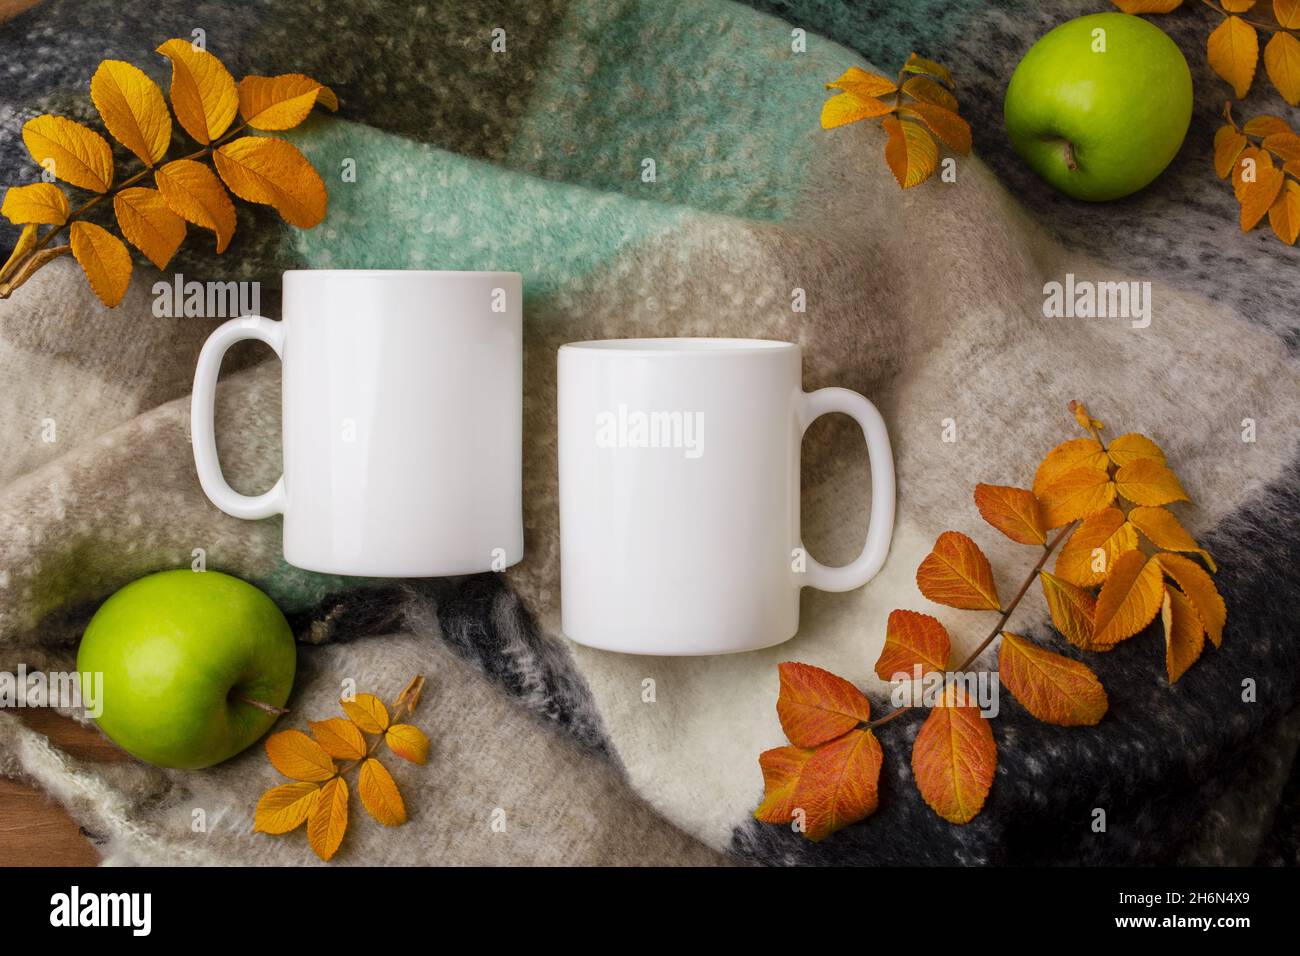 Two coffee white mugs mockup with cozy woolen blanket, green apples and fall yellow leaves. Empty mug mock up for design promotion, styled template Stock Photo